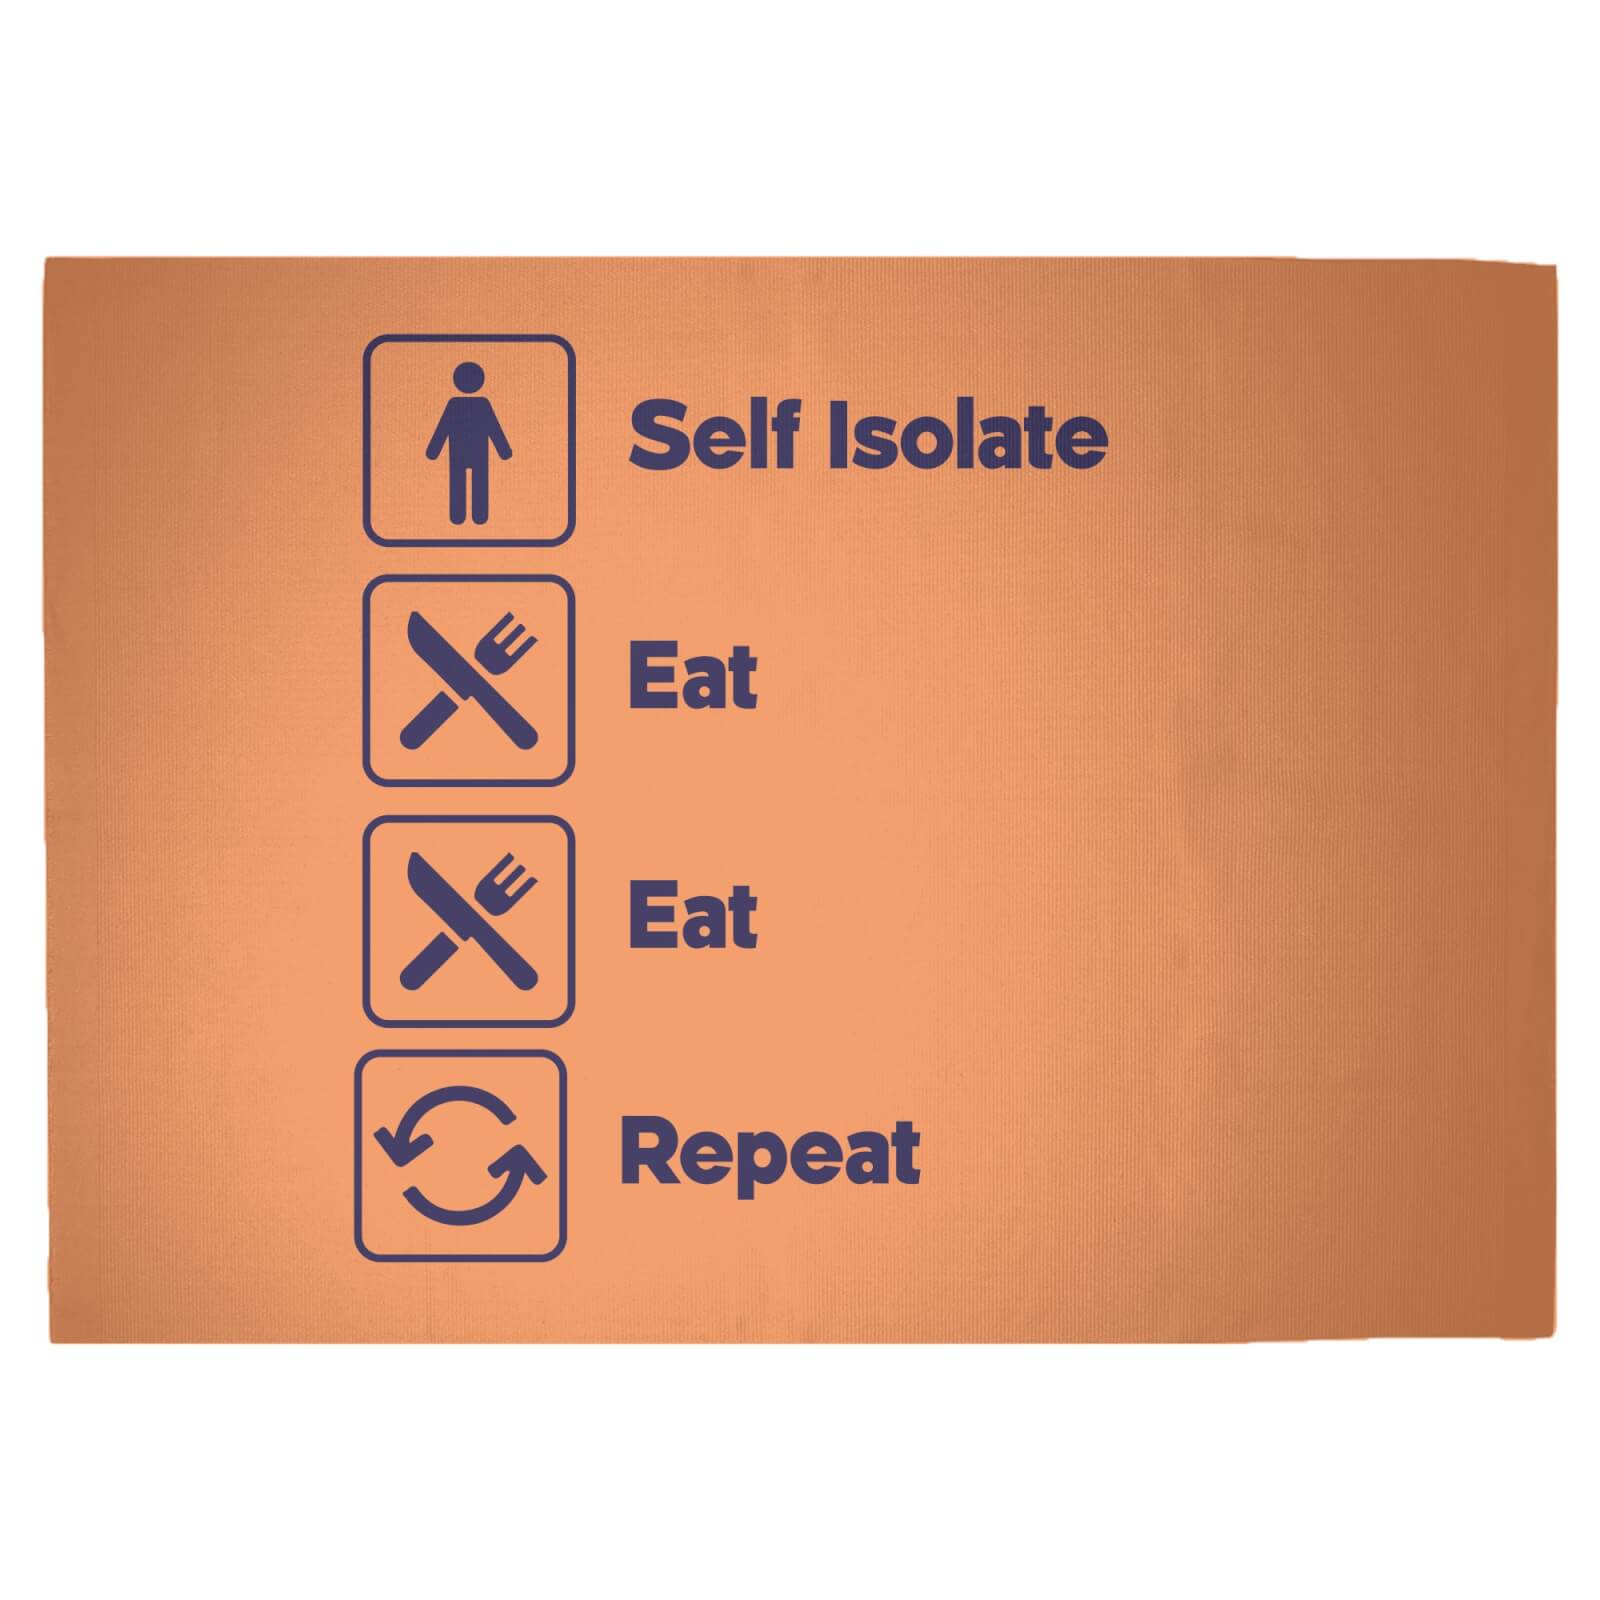 Mens Self Isolate Eat Eat Repeat Woven Rug - Large